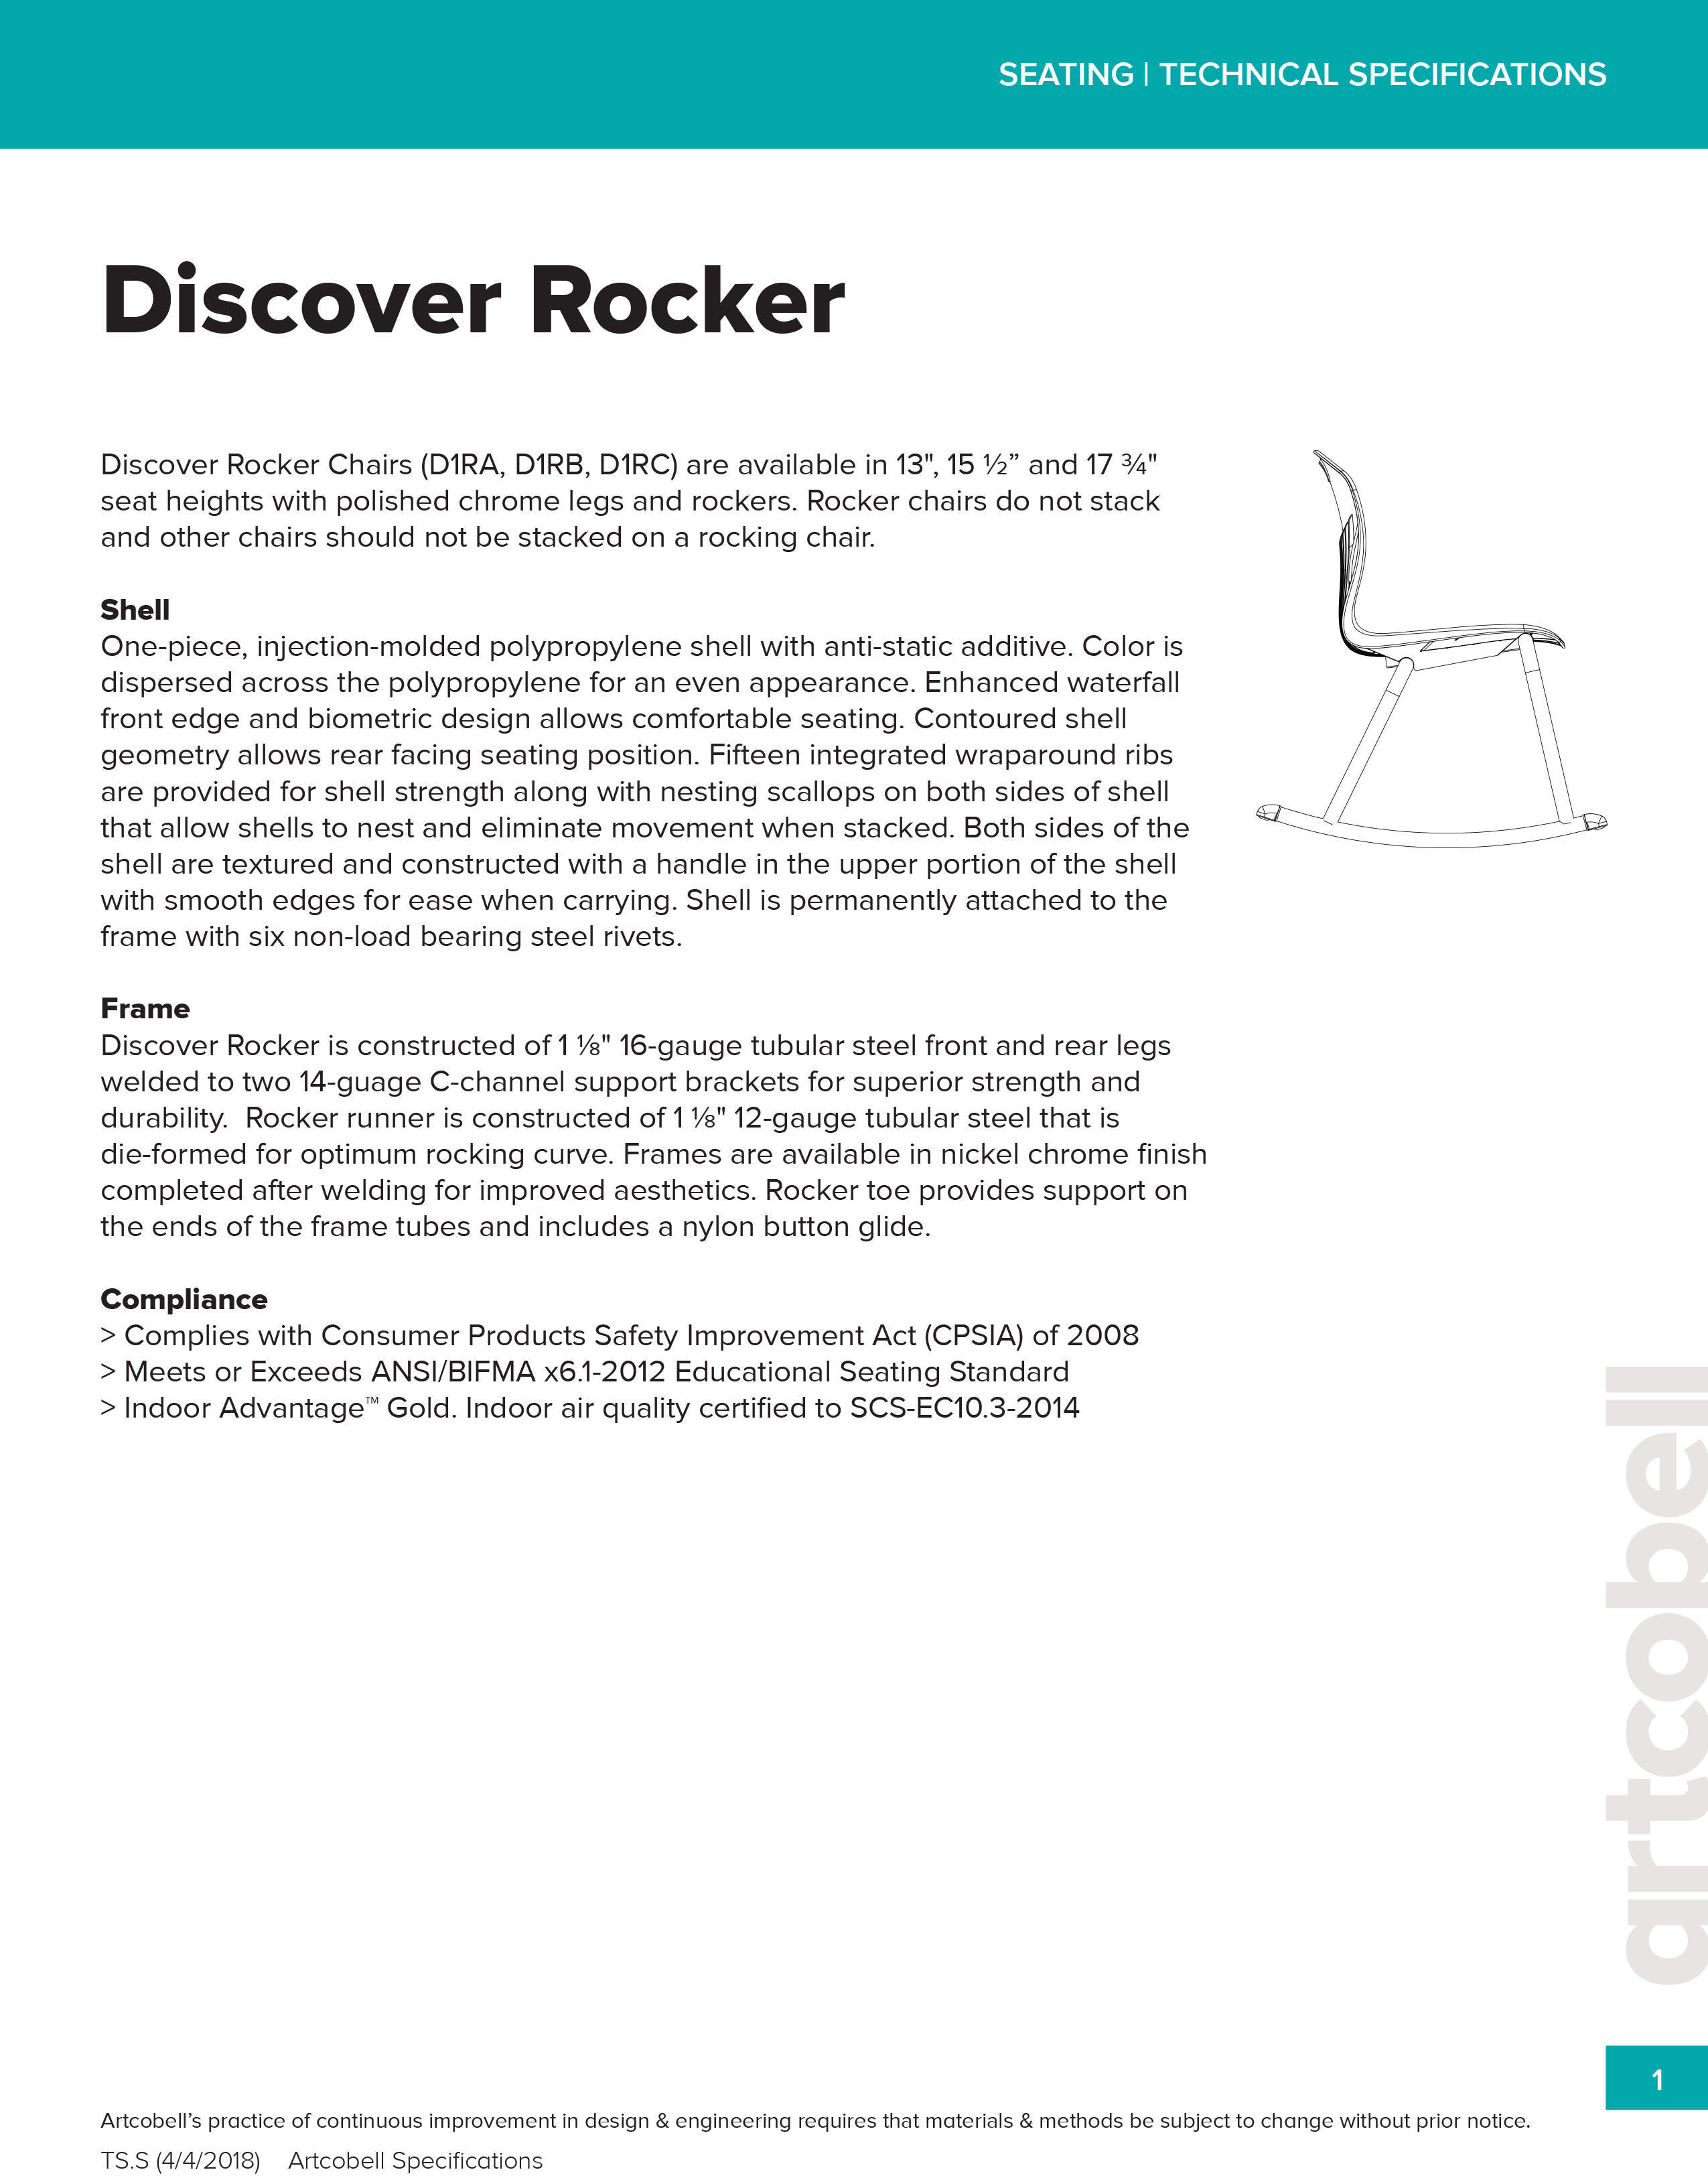 SeatingSpecifications_DiscoverRocker